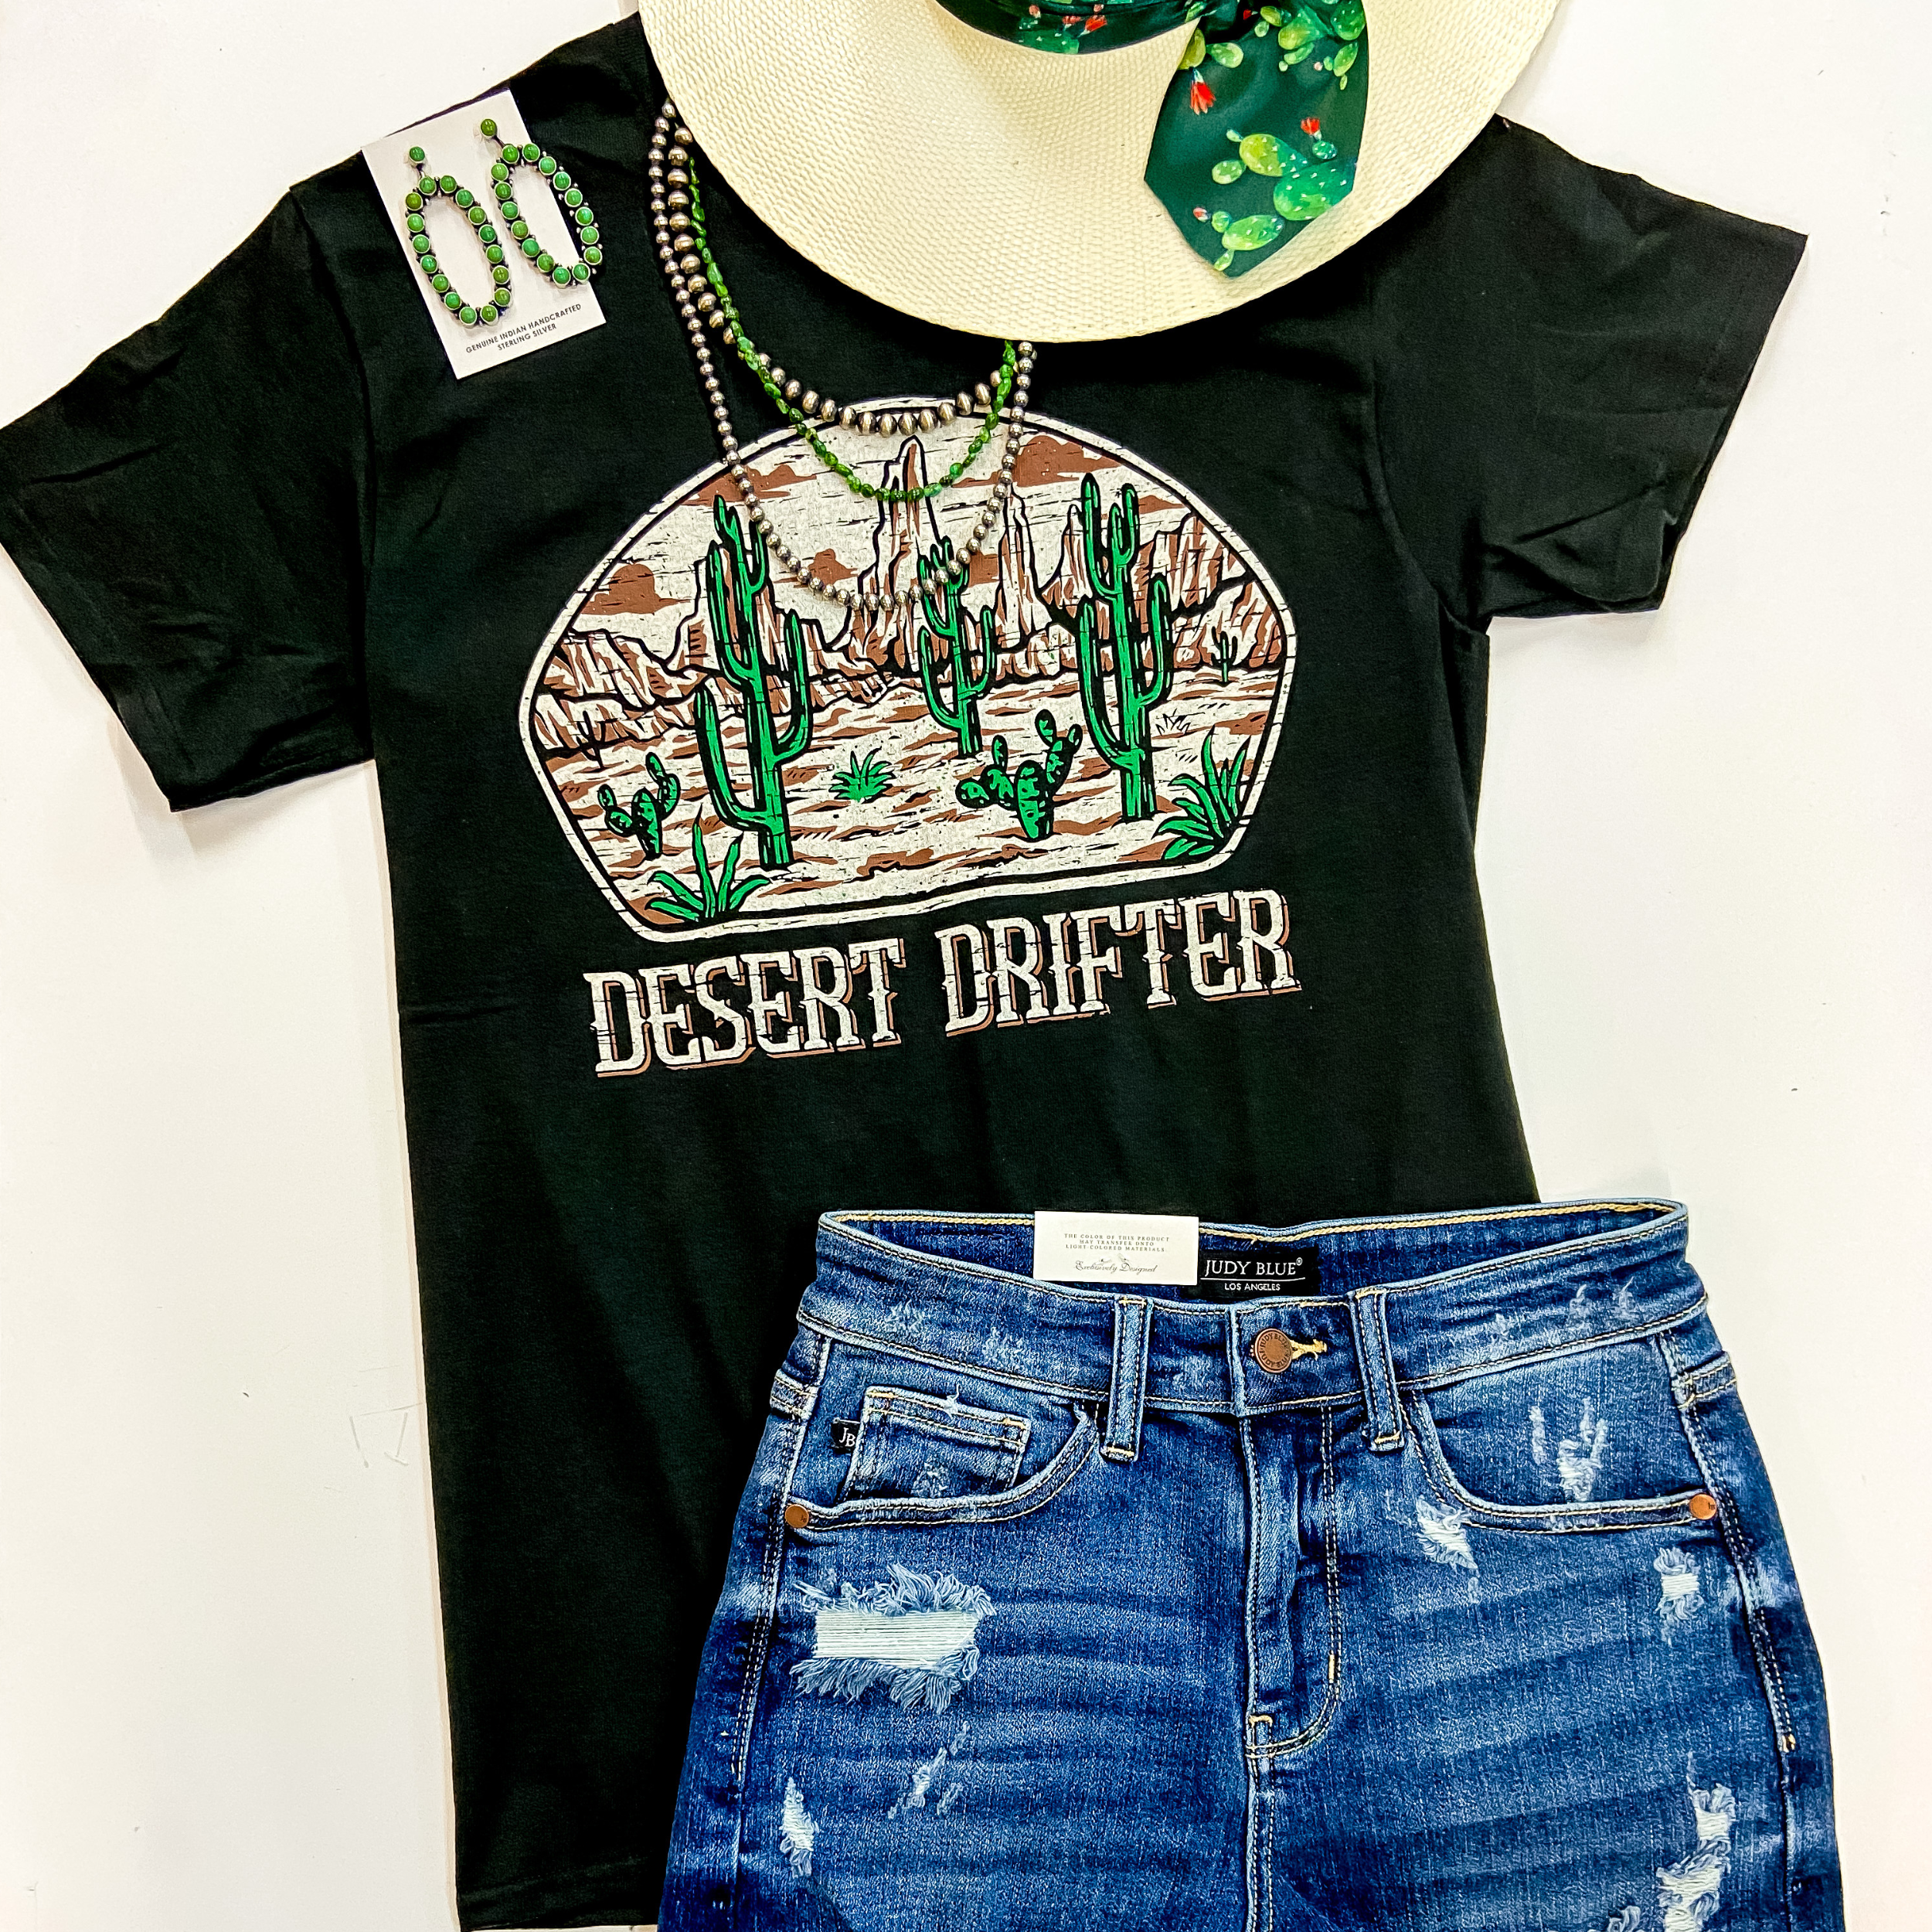 A black short sleeve tee shirt with a desert graphic of mountains and cactus with the phrase "Desert Drifter" written underneath. This tee is pictured on a white background with denim shorts, sterling silver and turquoise jewelry, and a straw hat.